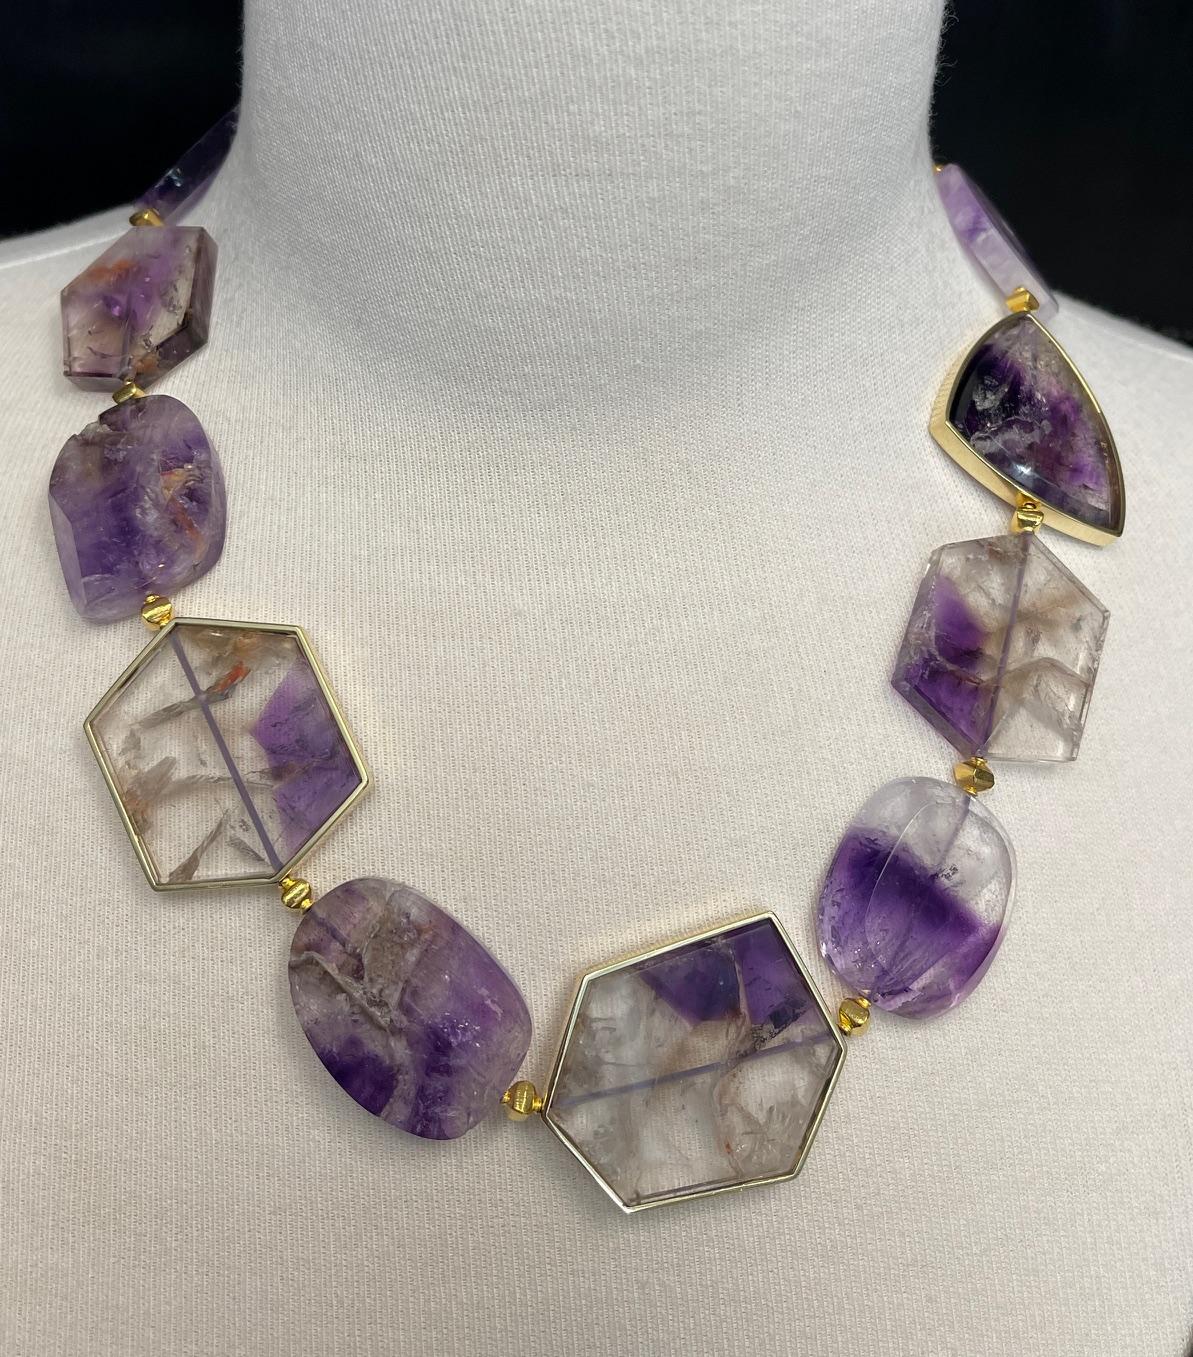  Amethyst Slice Bead Necklace, 555 Carats Total with 18K Yellow Gold Bezels For Sale 2